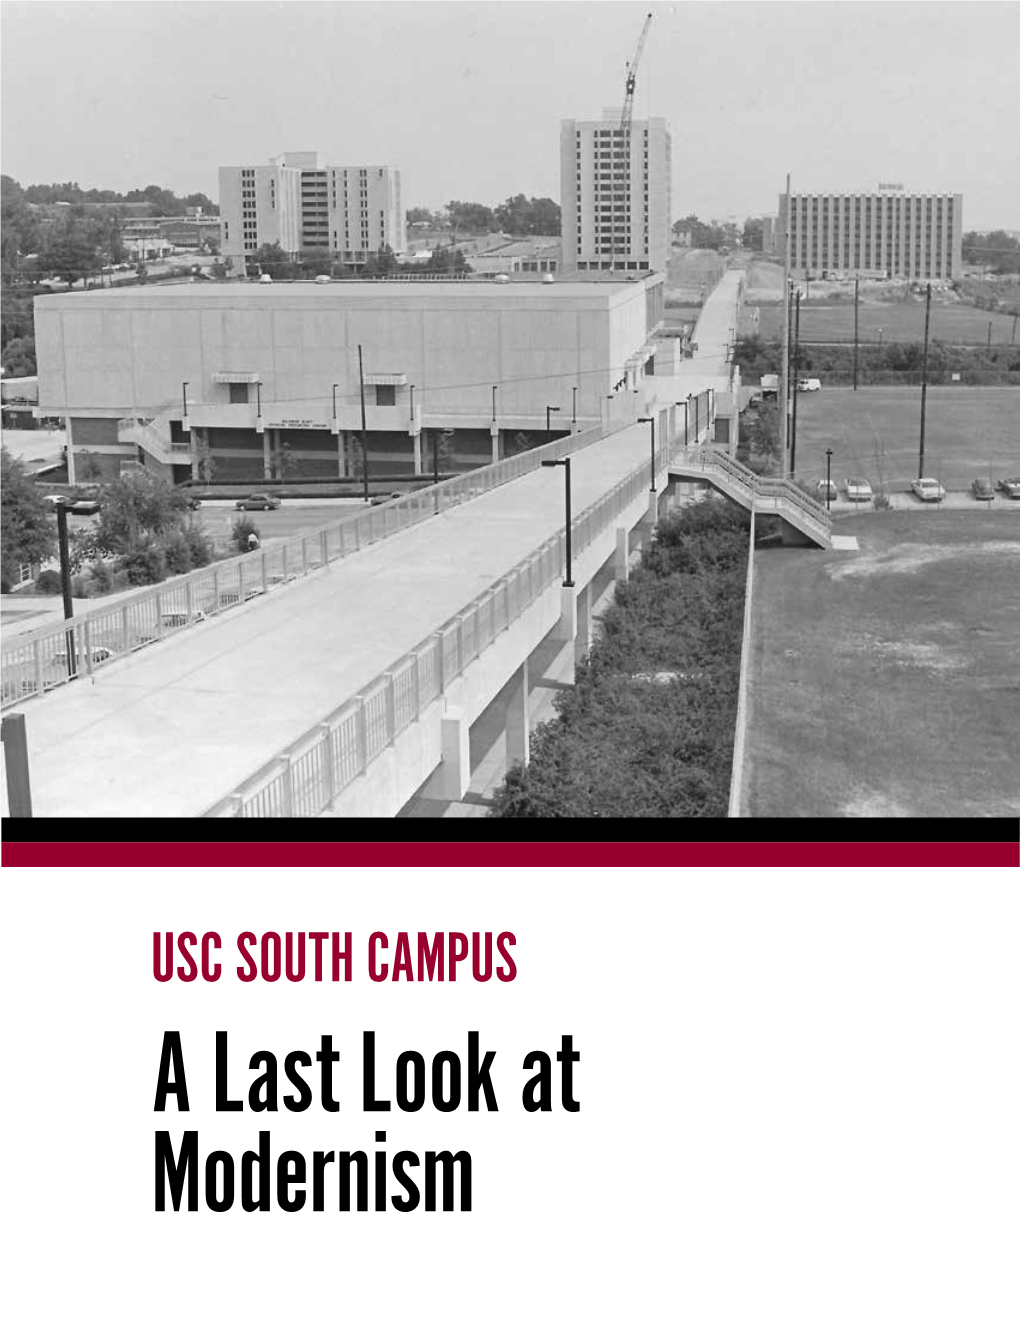 USC SOUTH CAMPUS a Last Look at Modernism ARTH 542